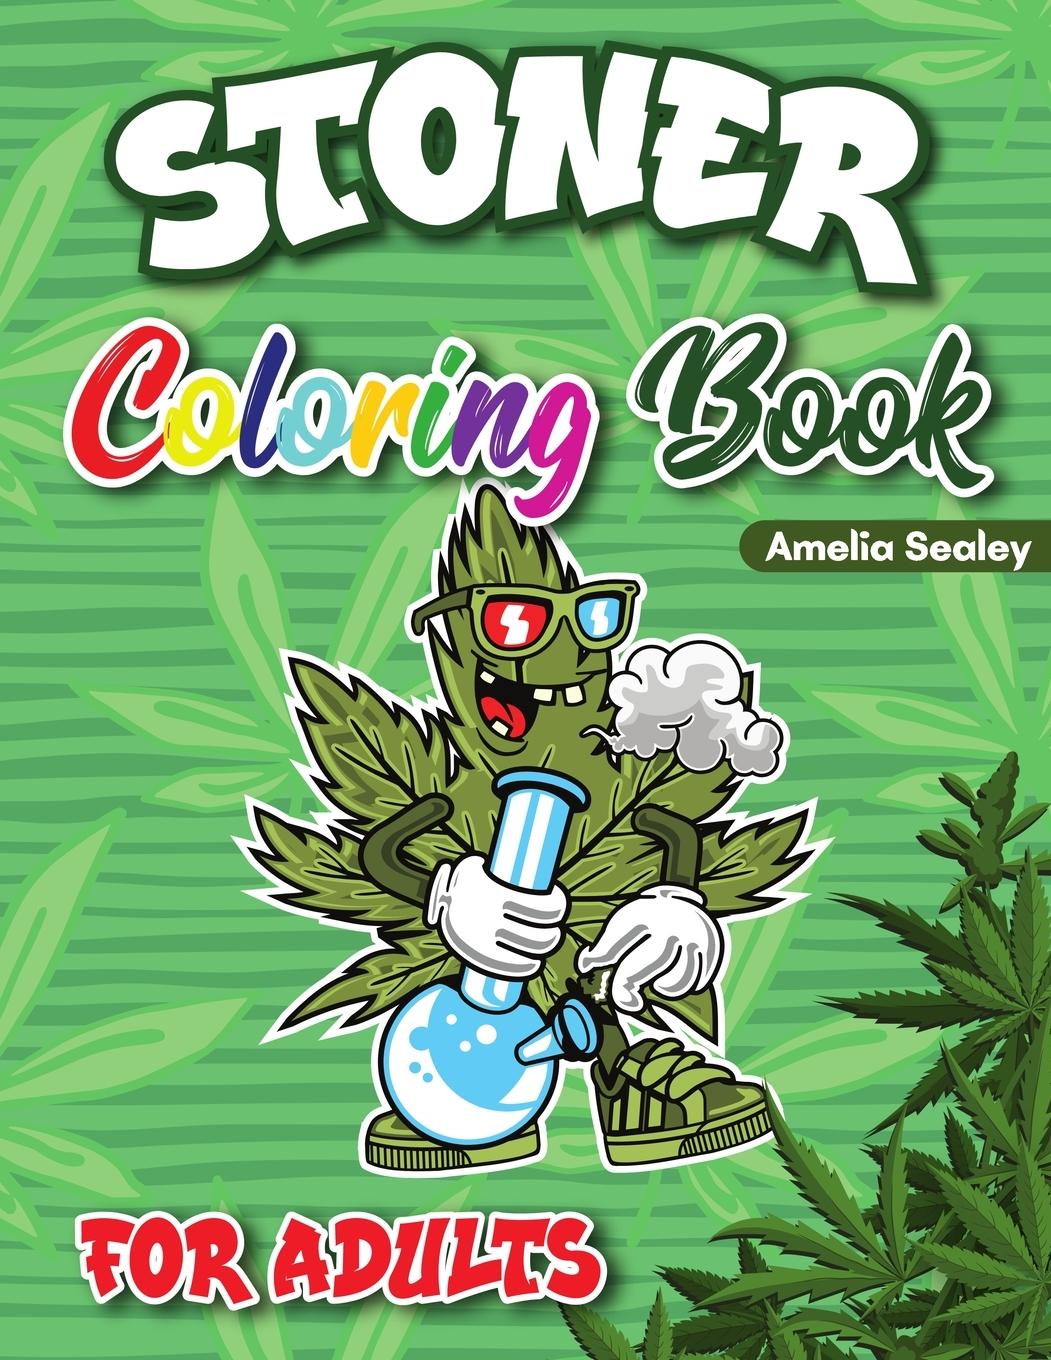 Book Stoner Coloring Book for Adults 